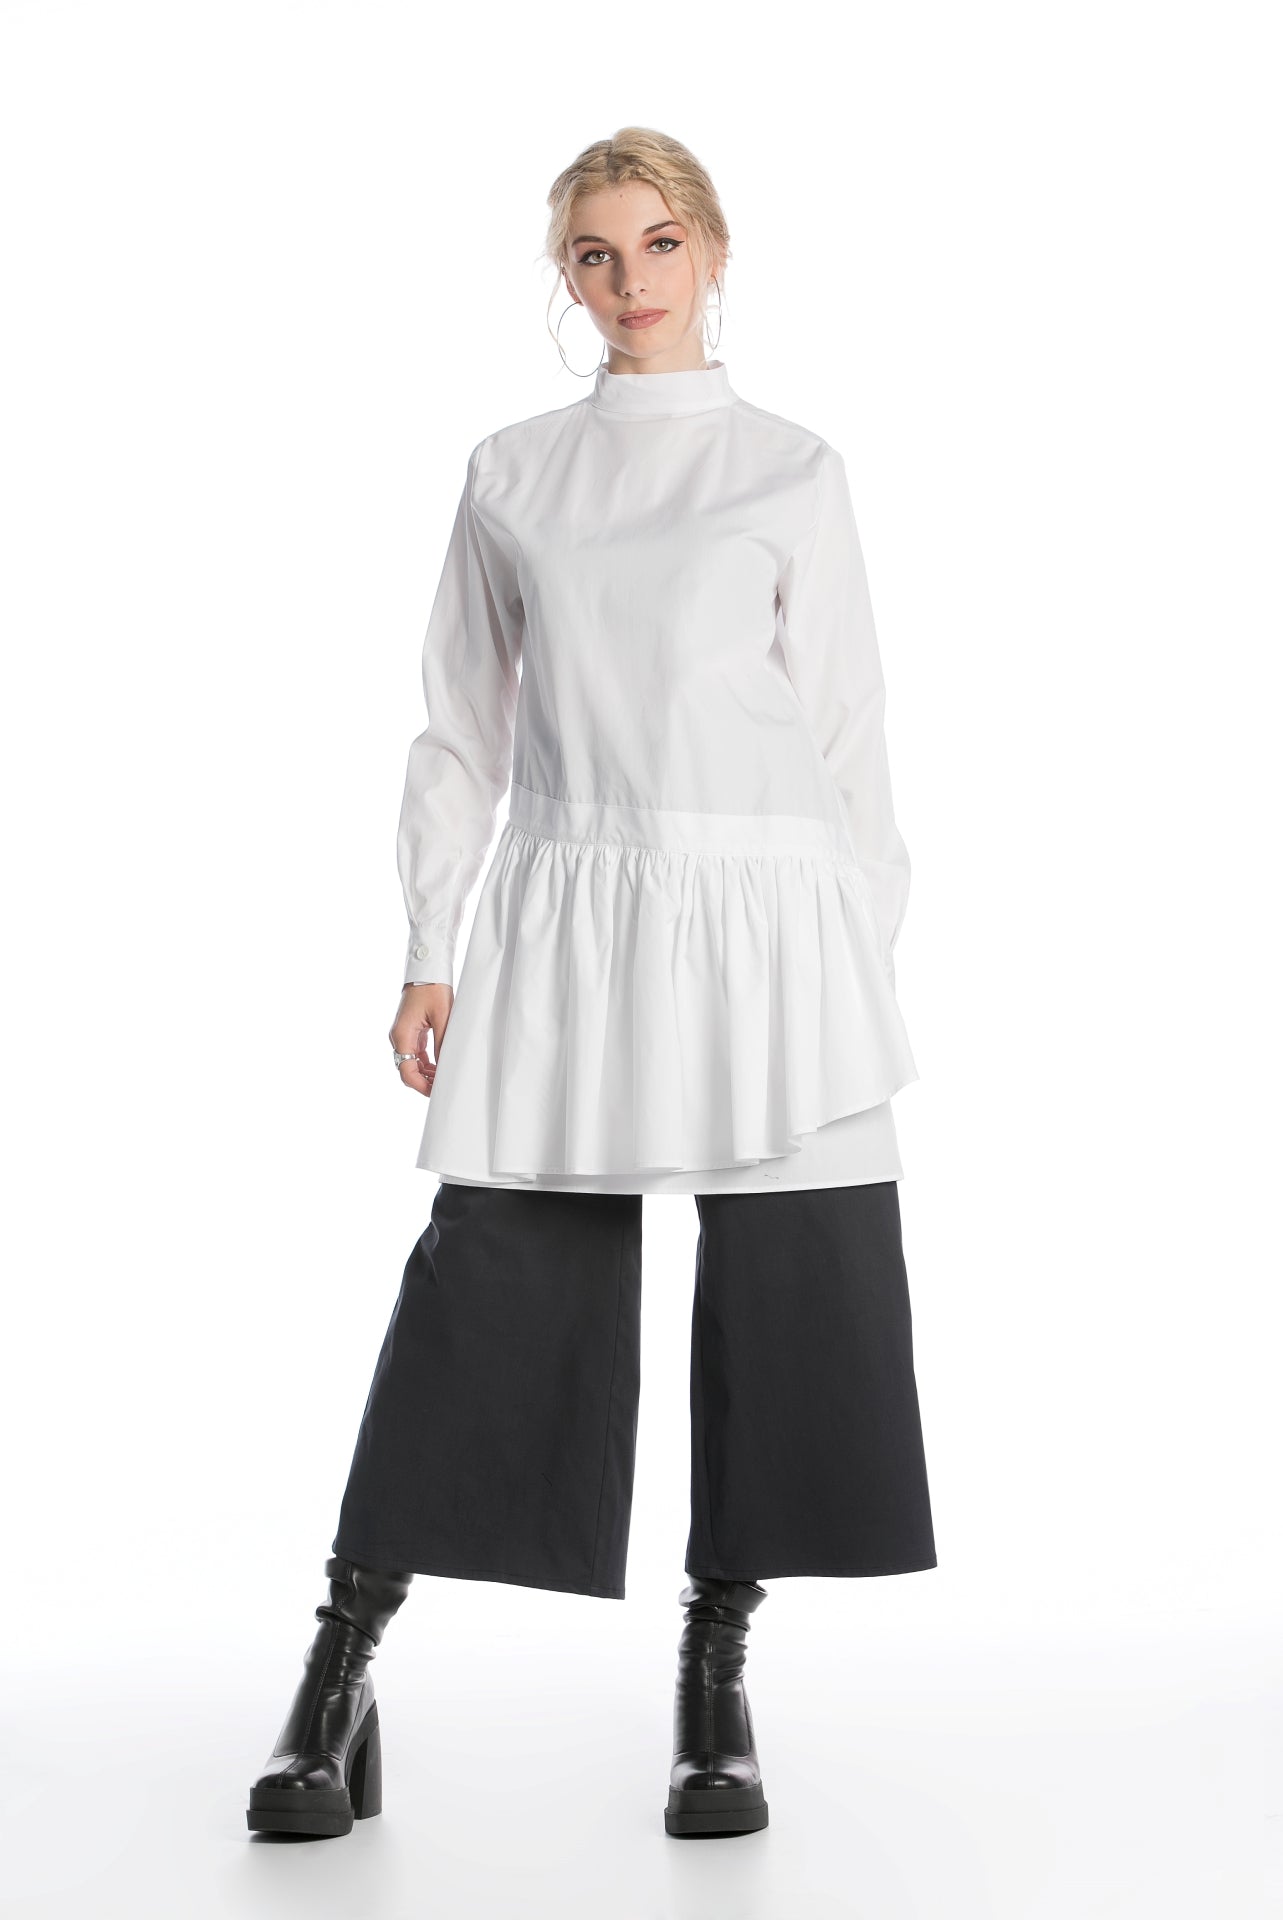 White Tunic Shirt With High Neck